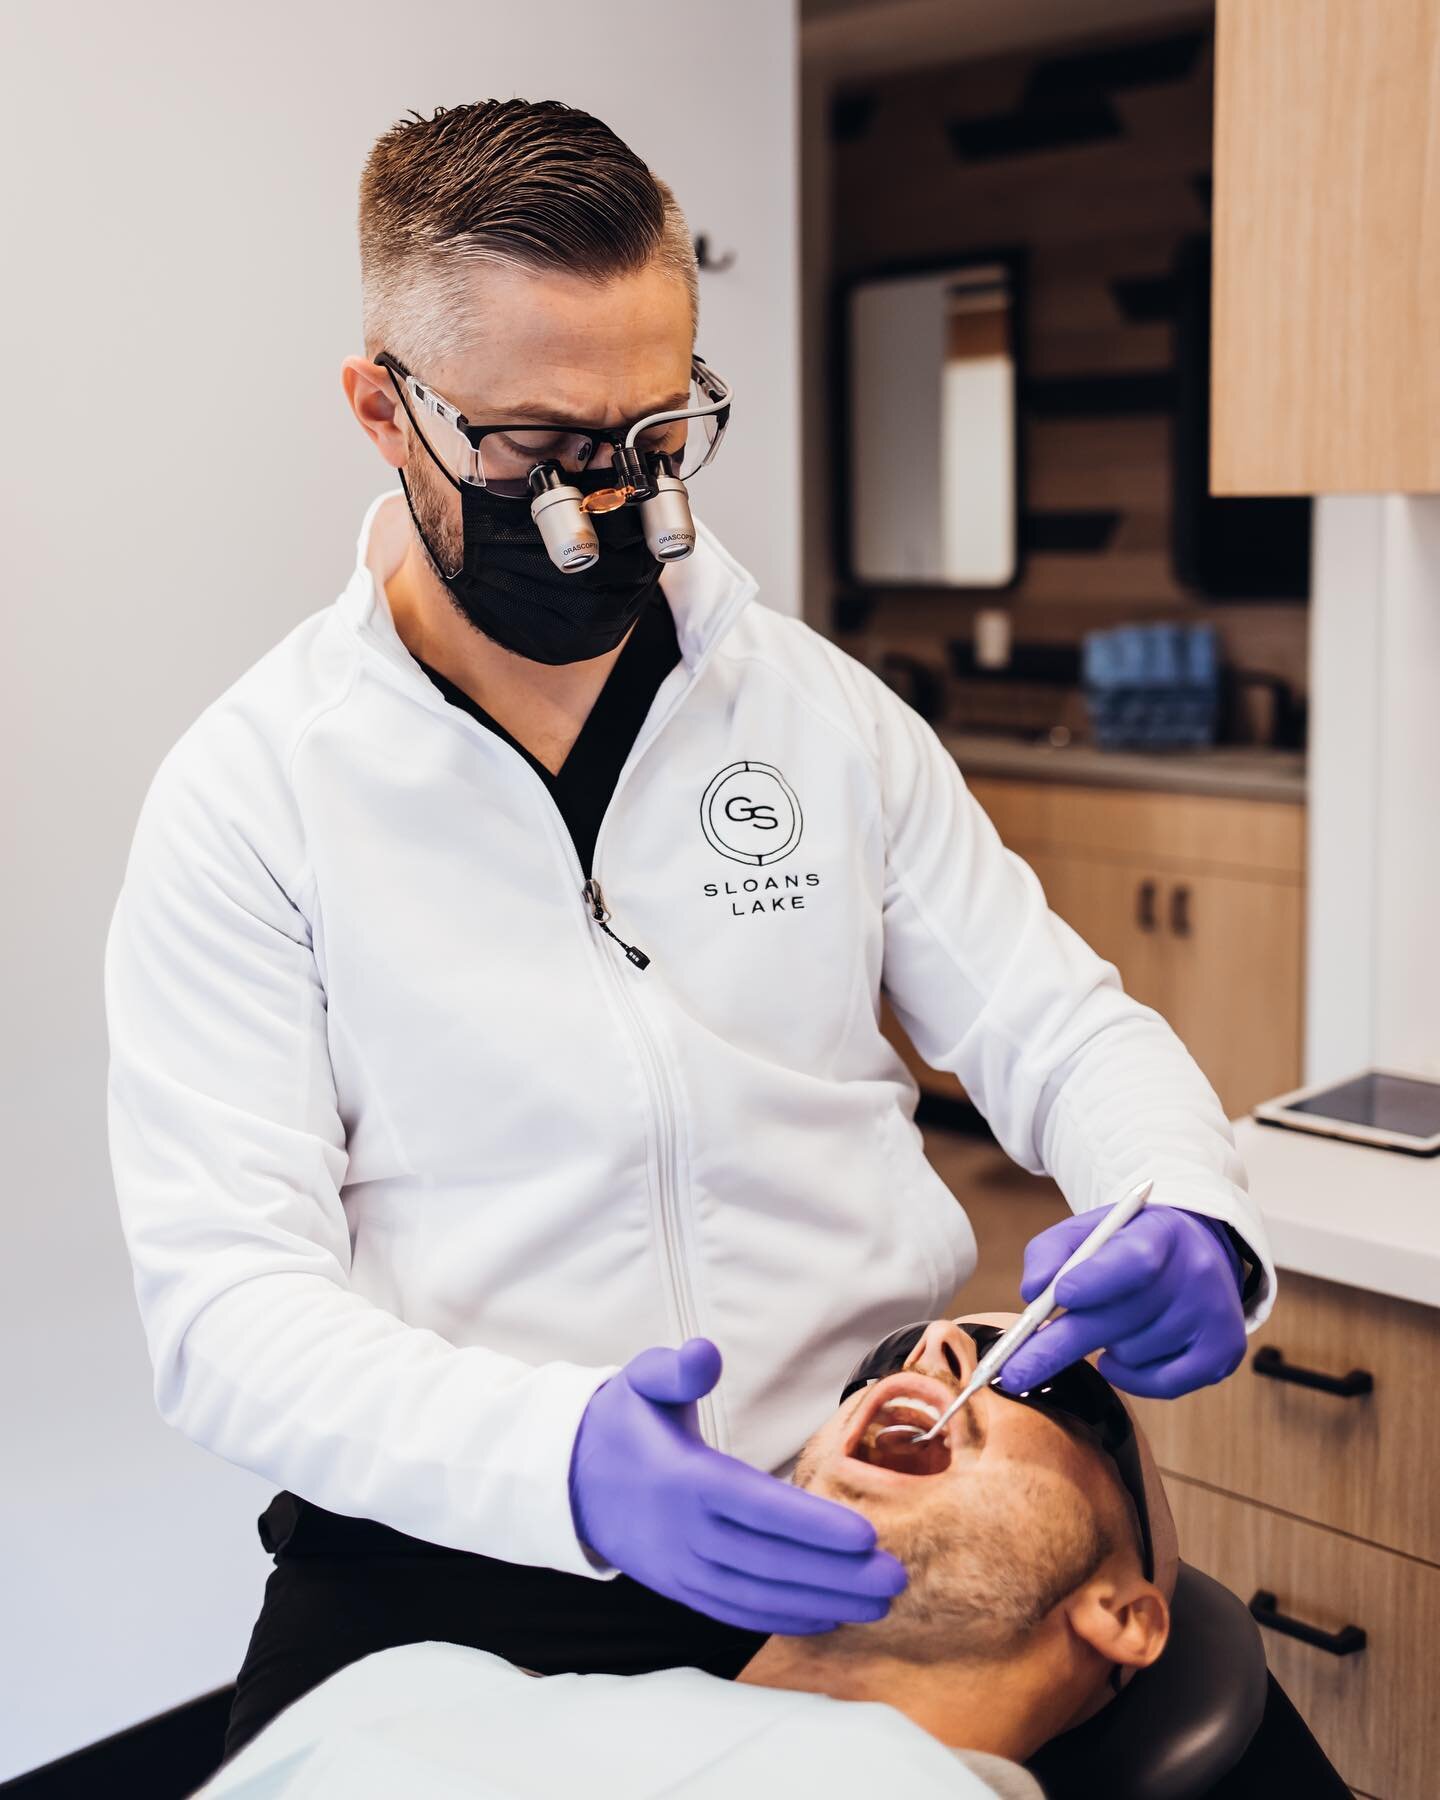 Did you know that teeth grinding or clenching can cause headaches, muscle pain, and lead to expensive dental issues? Early recognition of these issues can prevent long term pain and expensive dental treatment.  Click the link in our bio to schedule y